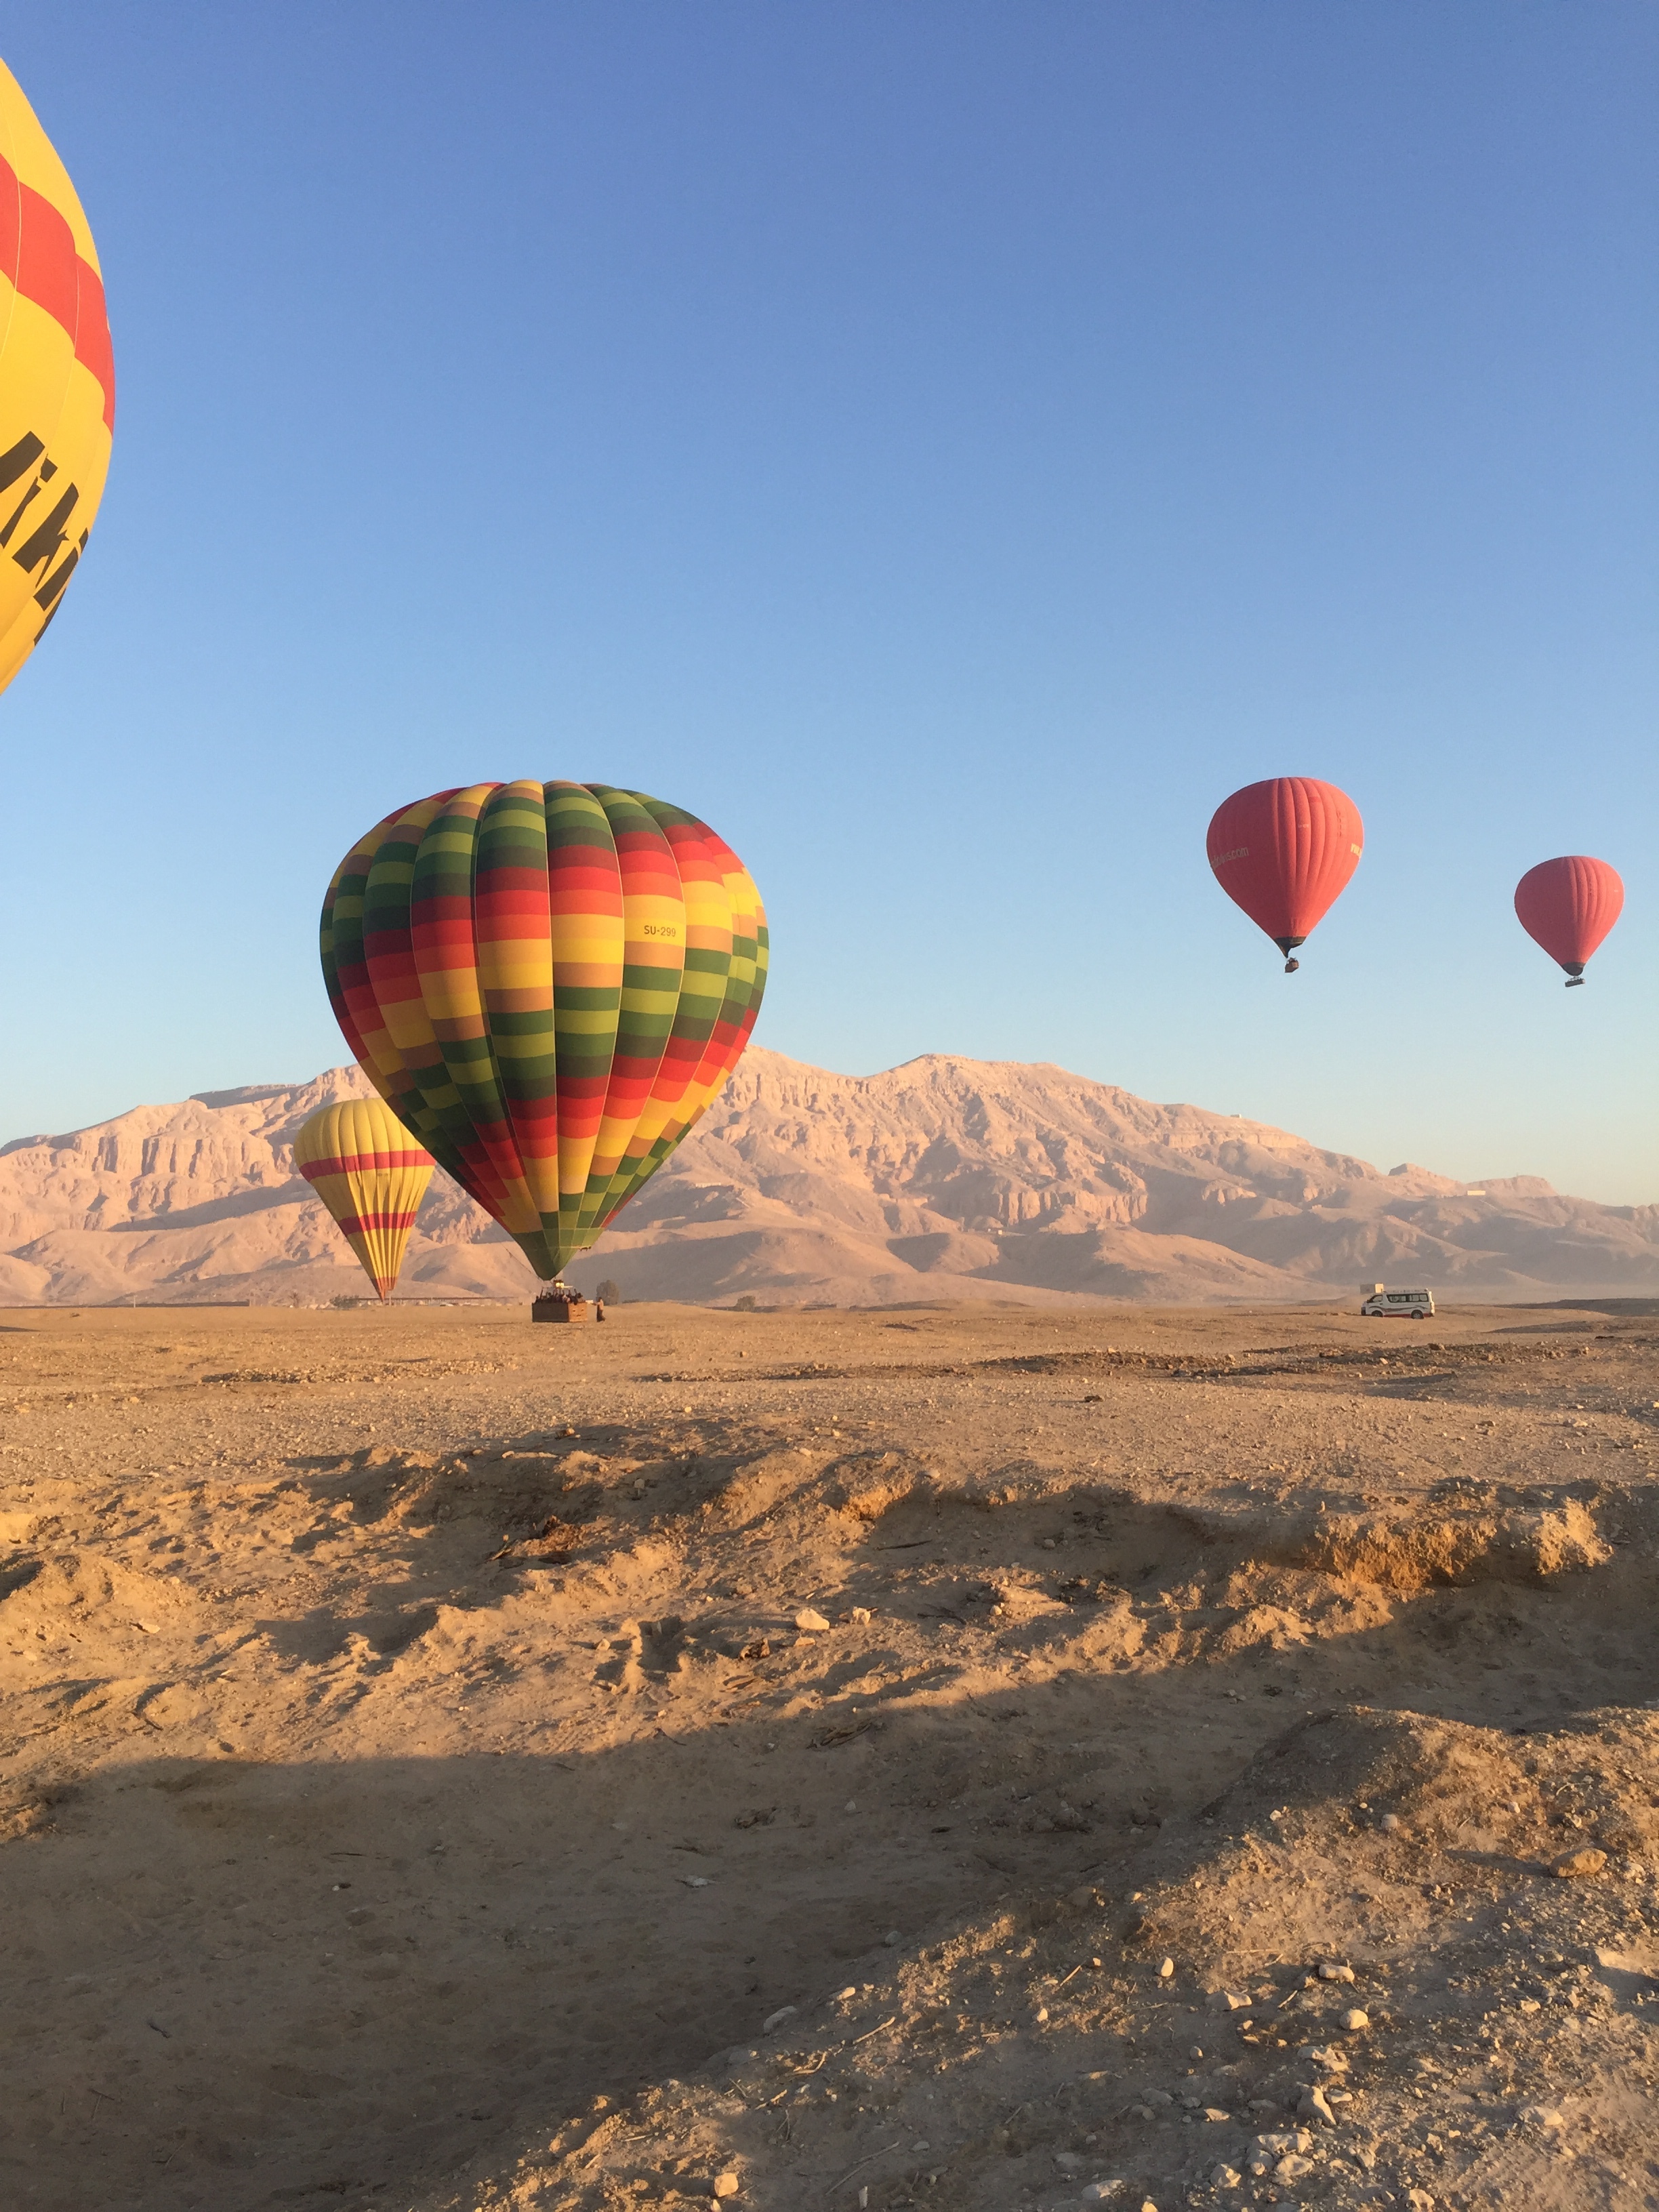  Hot air balloons landing in the desert south of the sacred mountain,&nbsp;El Qurn, where the Valleys of the Nobles, Queens and Kings are located.&nbsp;  Image © Katey Corda, 2017 